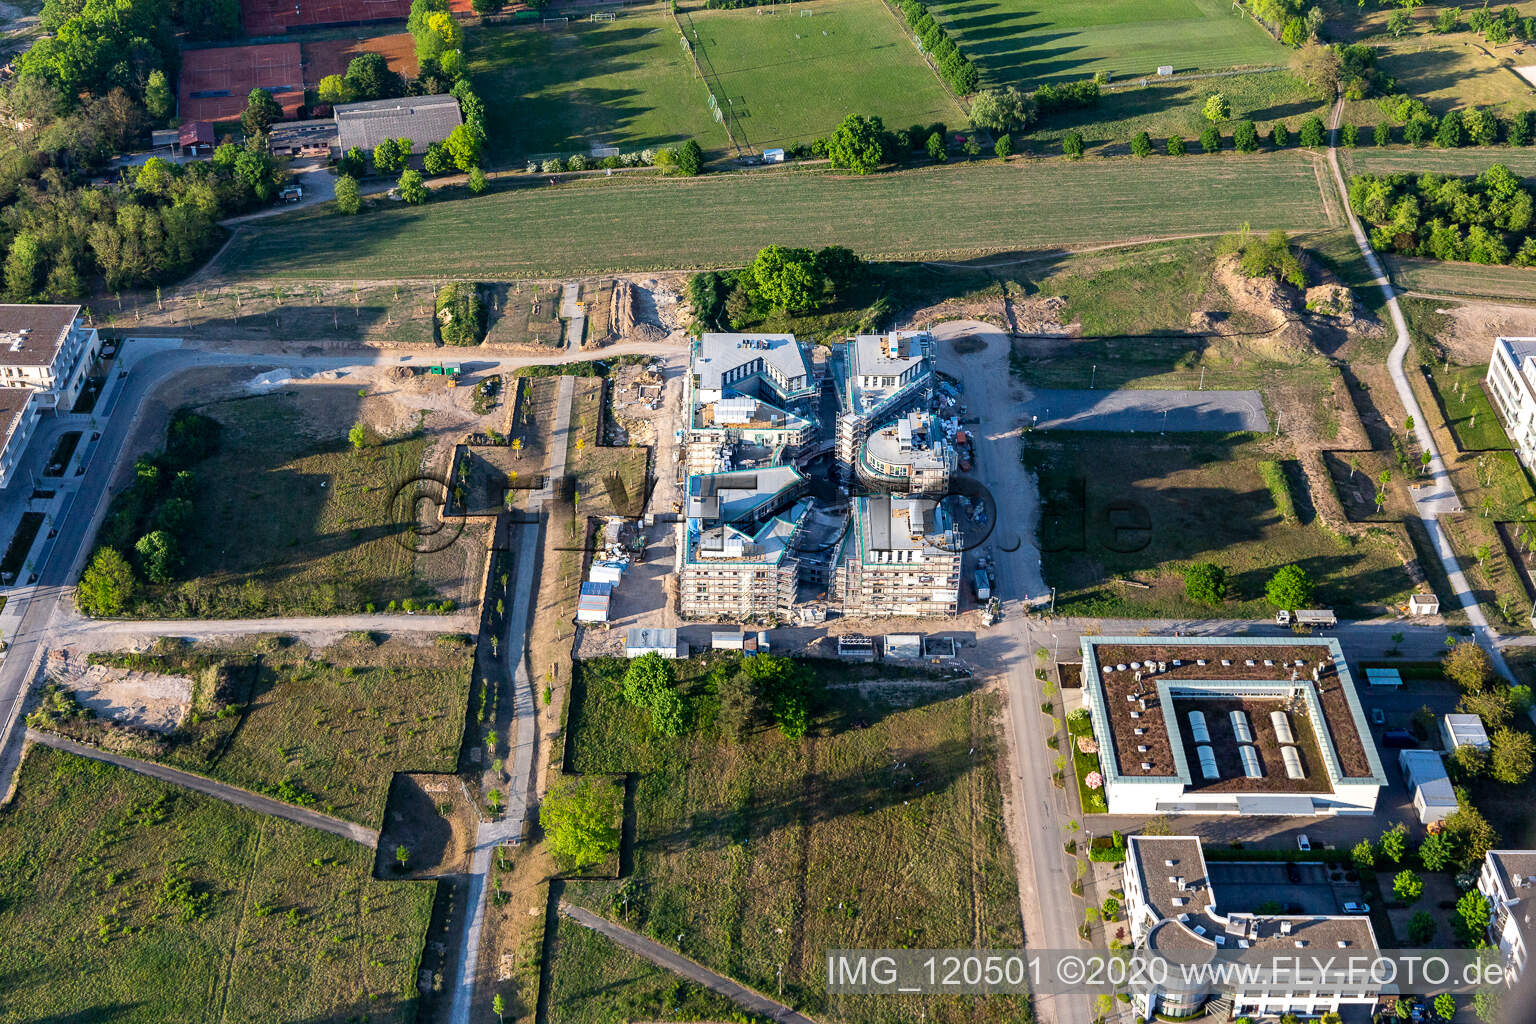 Construction site of the LTC - Linder Technology Campus on Wilhelm-Schickard-Straße in the Technology Park Karlsruhe in the district Rintheim in Karlsruhe in the state Baden-Wuerttemberg, Germany from the drone perspective